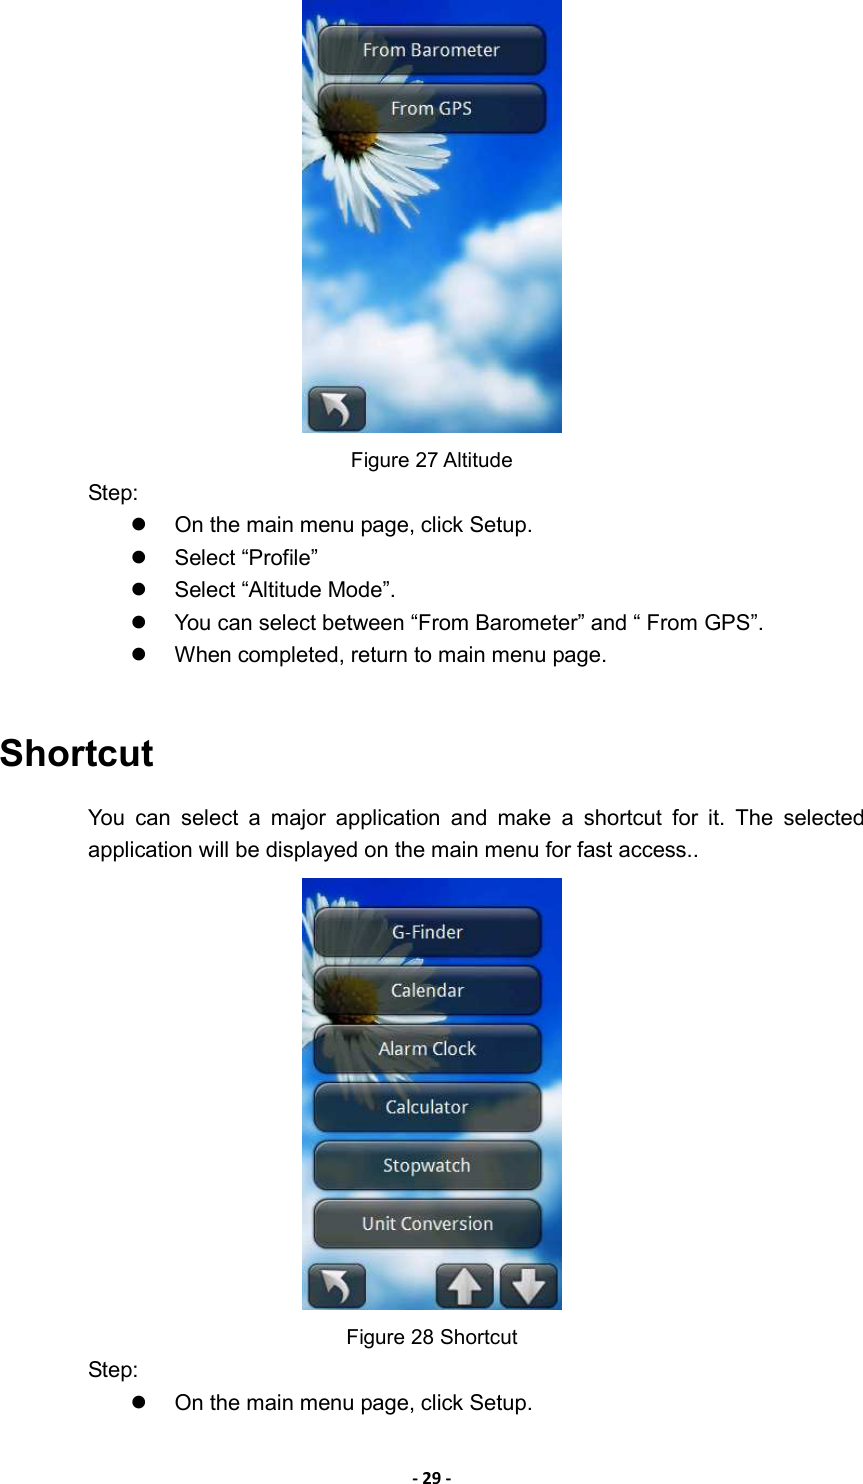 - 29 -  Figure 27 Altitude Step:   On the main menu page, click Setup.   Select “Profile”   Select “Altitude Mode”.     You can select between “From Barometer” and “ From GPS”.   When completed, return to main menu page.  Shortcut You  can  select  a  major  application  and  make  a  shortcut  for  it.  The  selected application will be displayed on the main menu for fast access..    Figure 28 Shortcut Step:   On the main menu page, click Setup. 